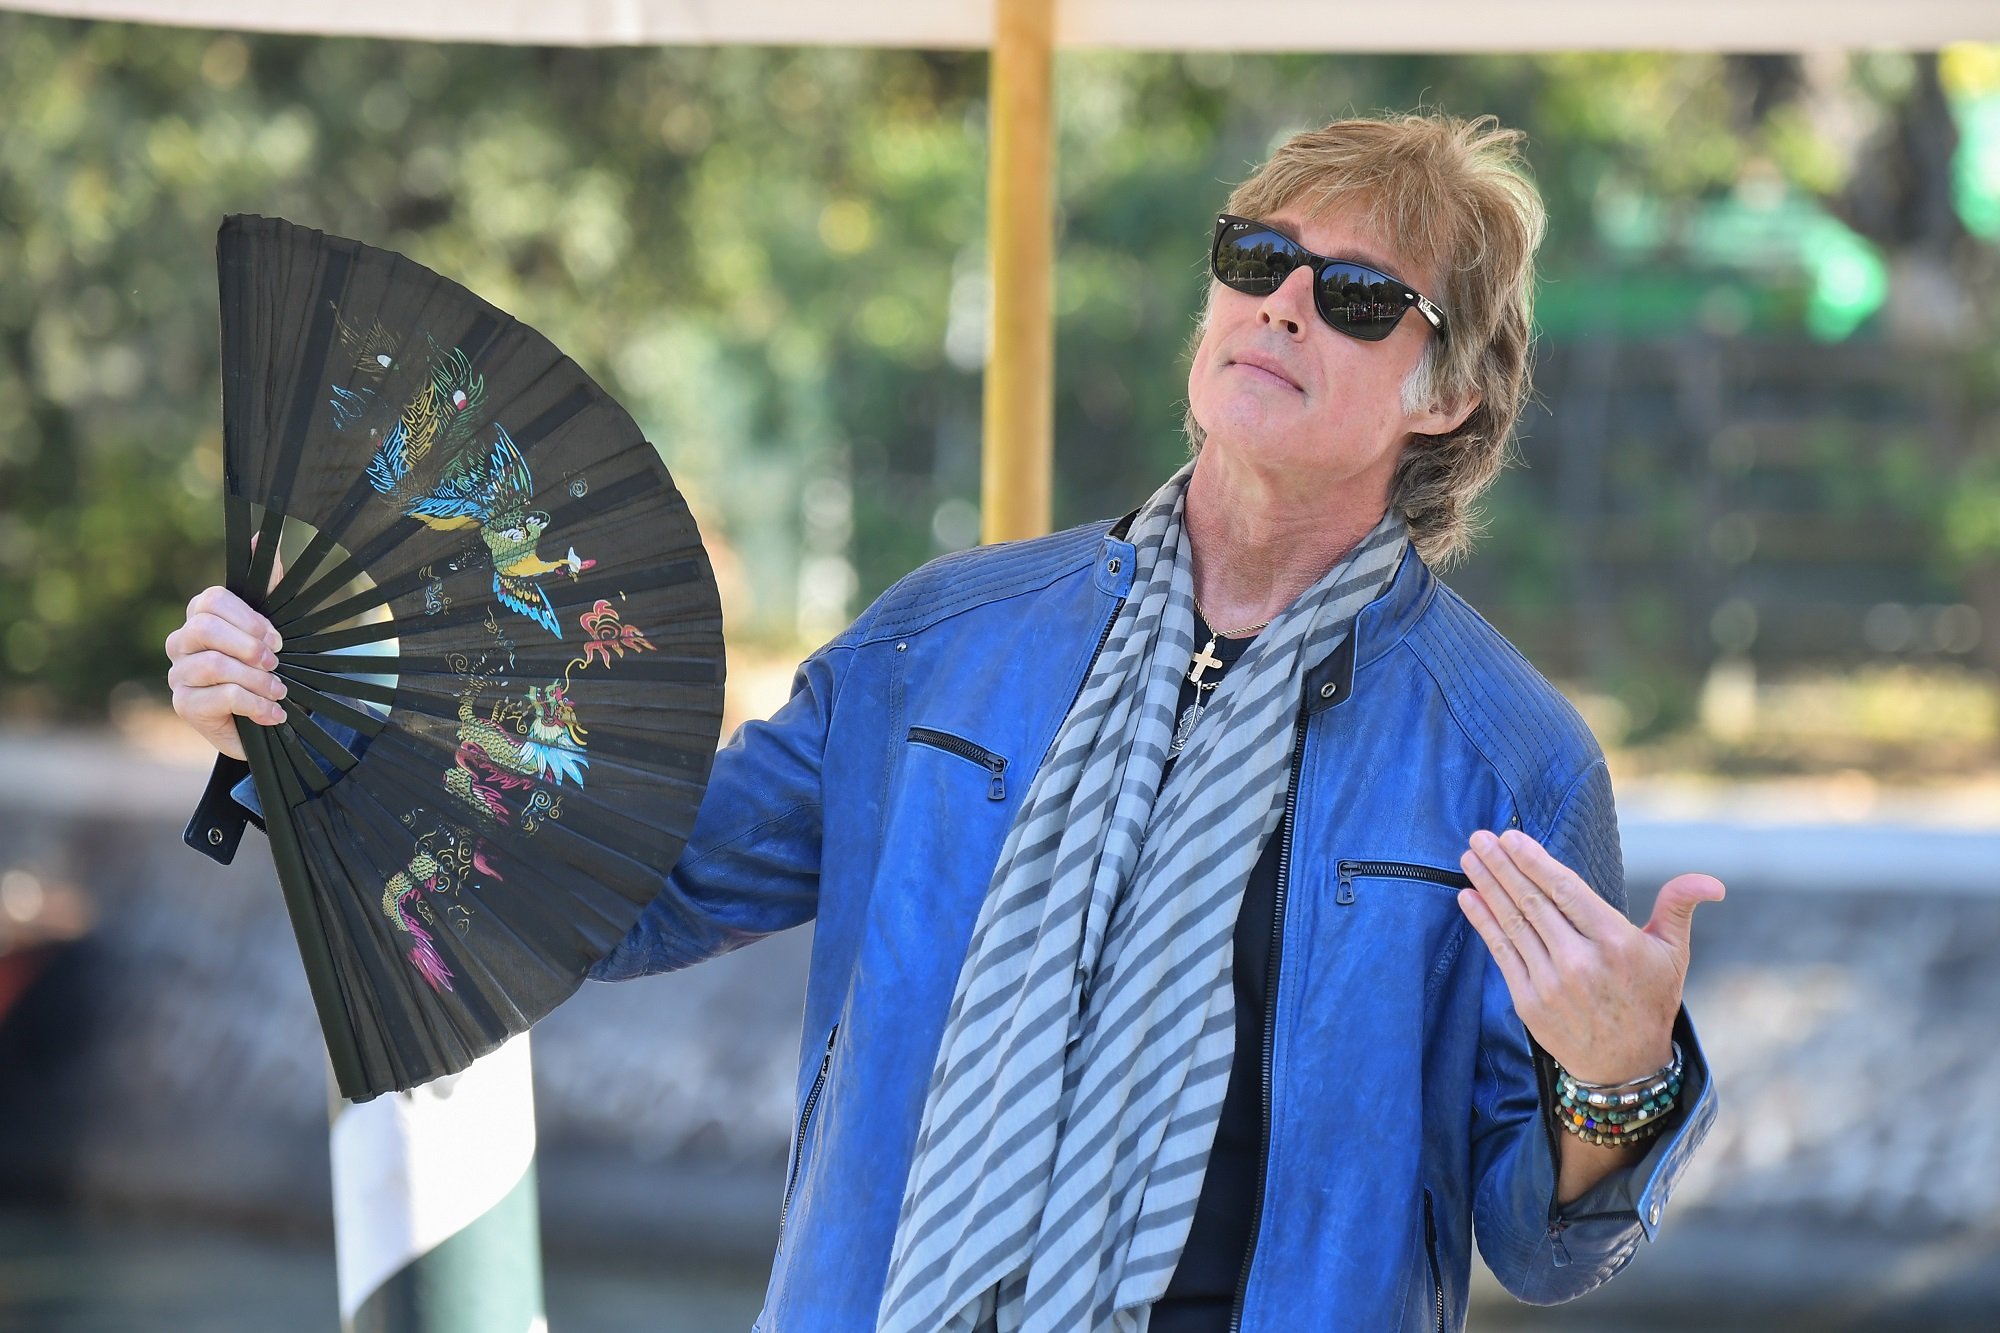 The Bold and the Beautiful star Ronn Moss, pictured here in a blue blazer and holding a fan